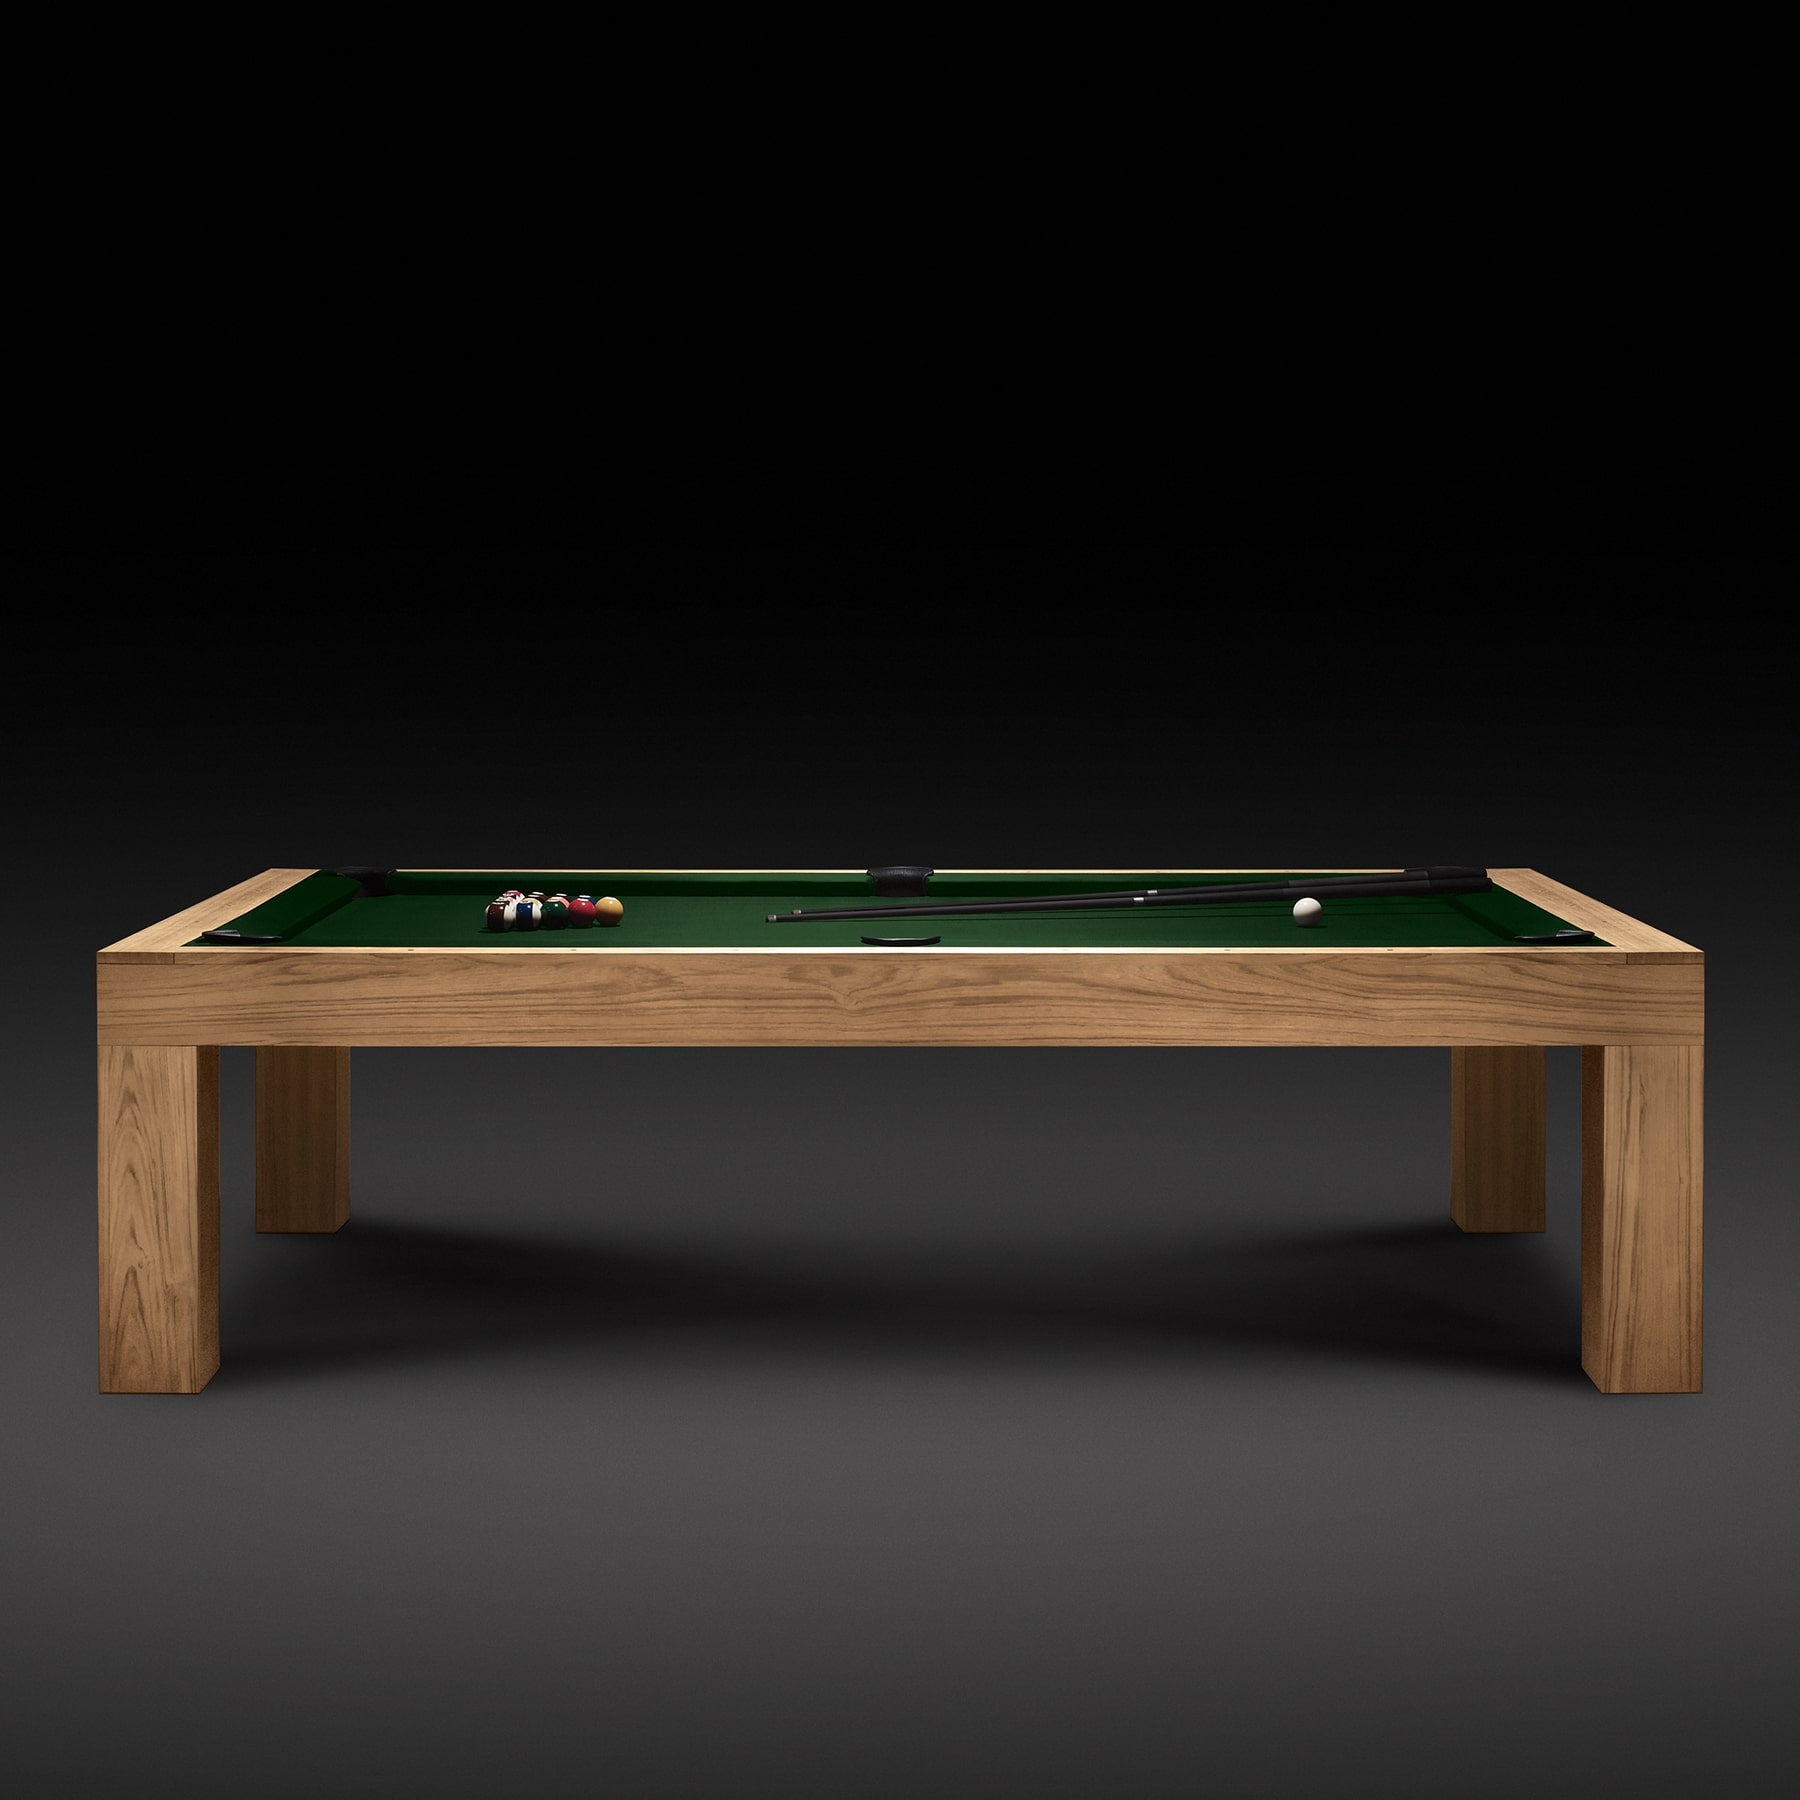 Limited Edition Pool Table - Dark Green | James Perse Los Angeles